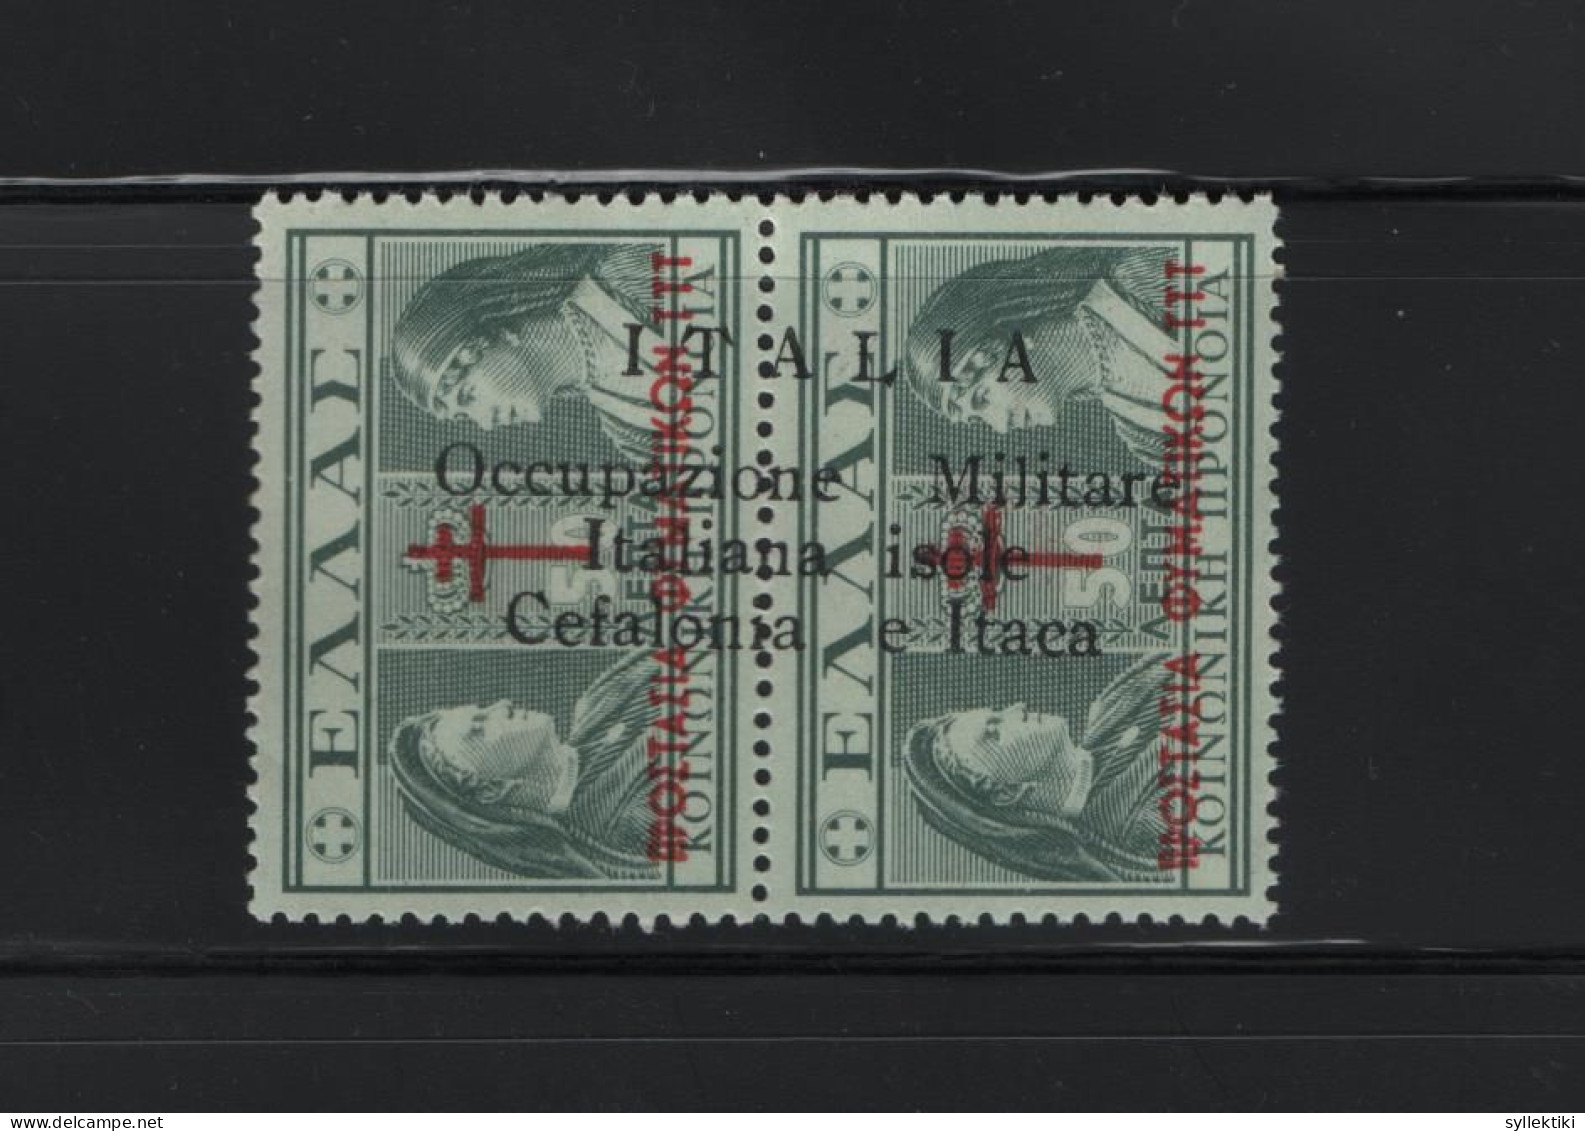 GREECE IONIAN ISLANDS 1941 50+50 LEPTA CHARITY ISSUE (ANTI TB) PAIR MNH STAMPS OVERPRINTED ITALIA Occupazione Militare I - Ionian Islands